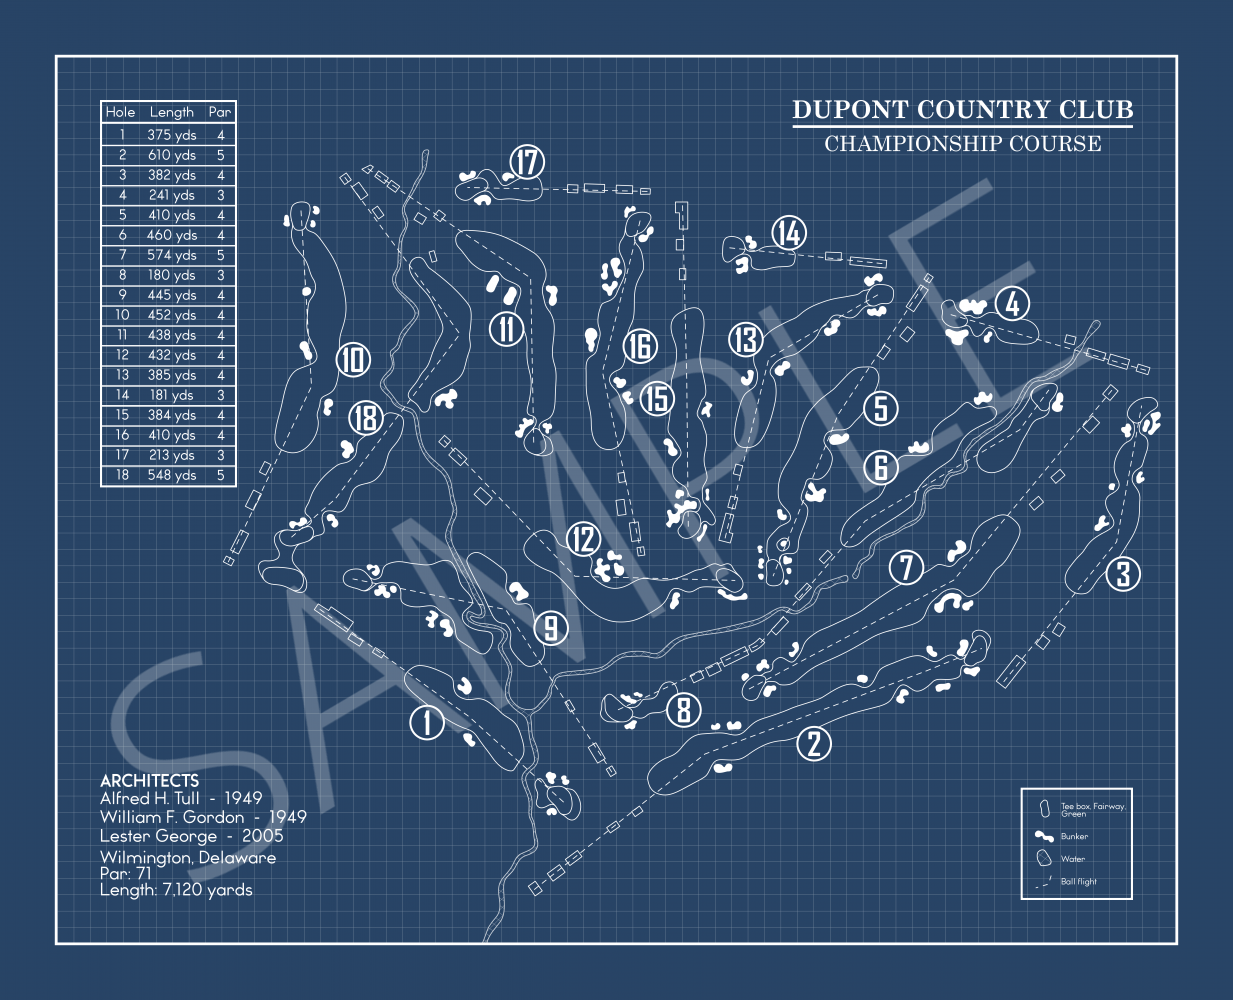 DuPont Country Club Championship Course Blueprint (Print)